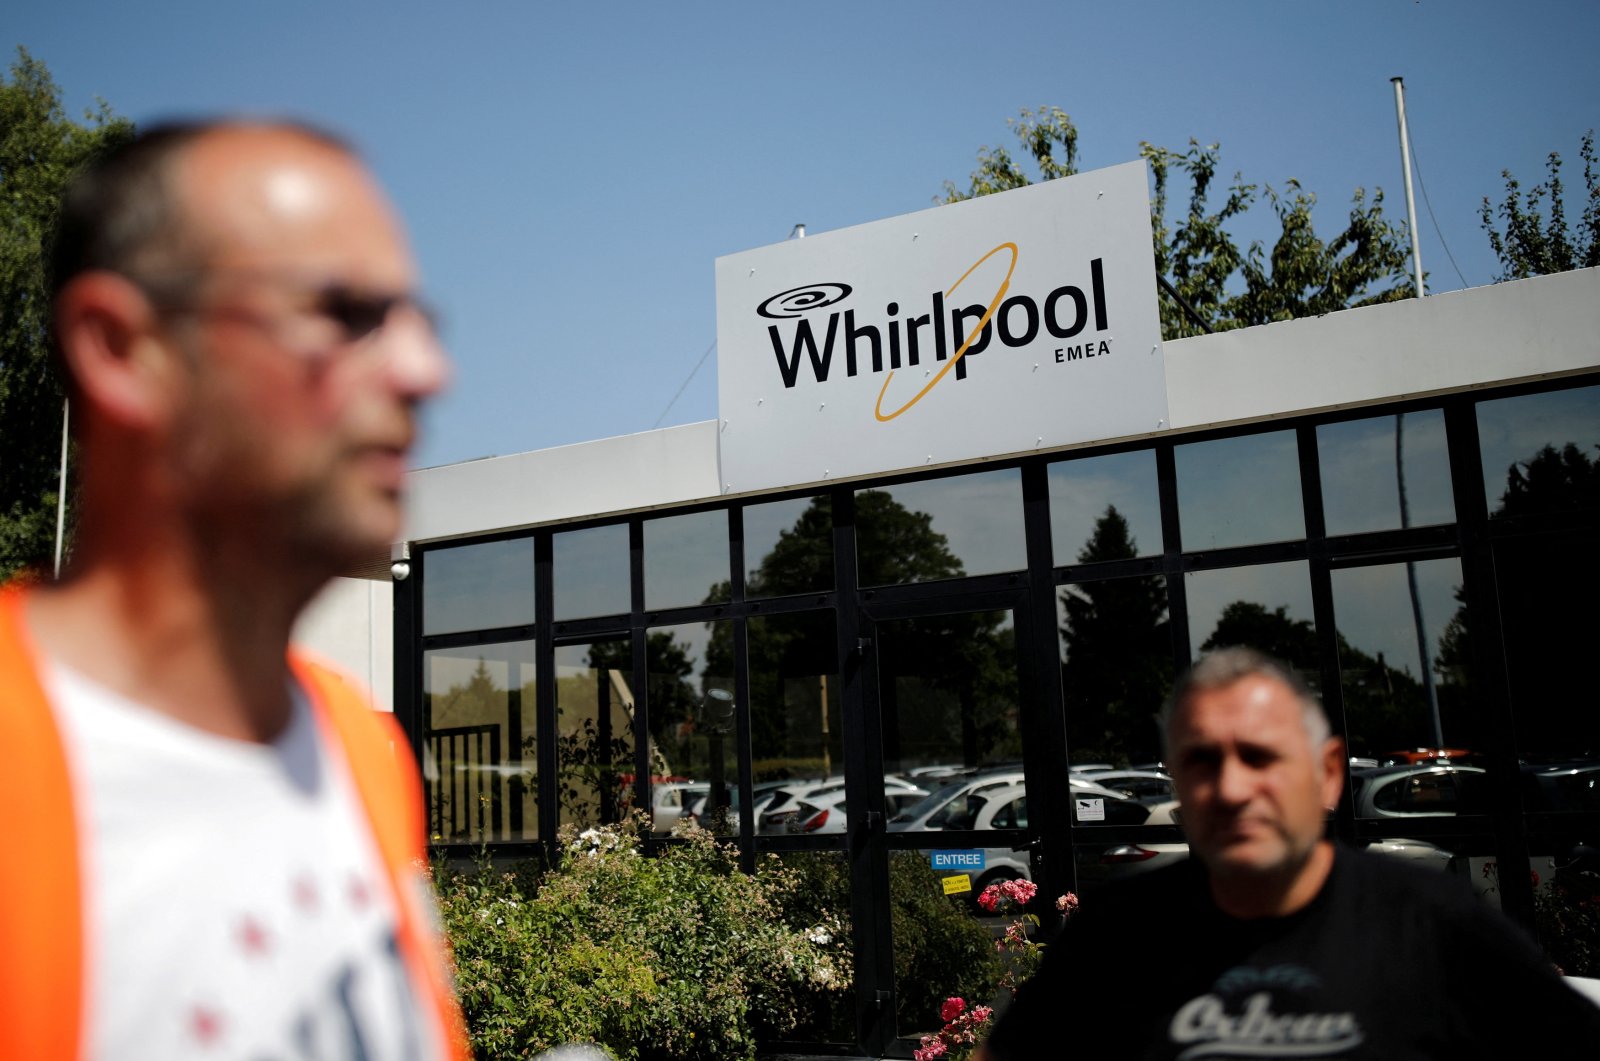 Employees at the Whirlpool company plant in the northern city of Amiens, France, June 14, 2017. (Reuters Photo)